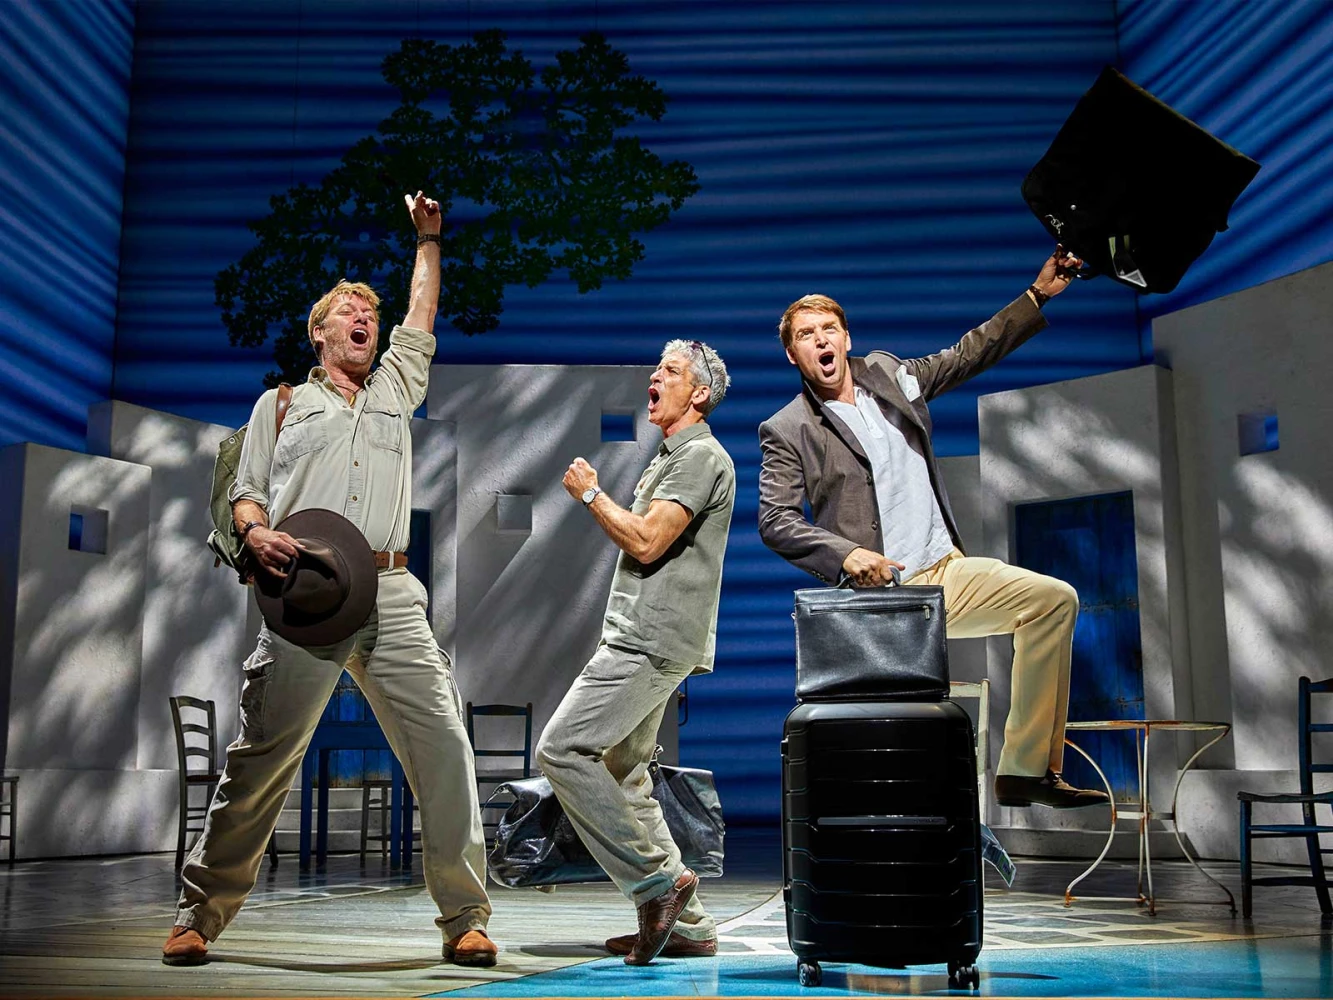 Mamma Mia! - Theater  The John F. Kennedy Center for the Performing Arts